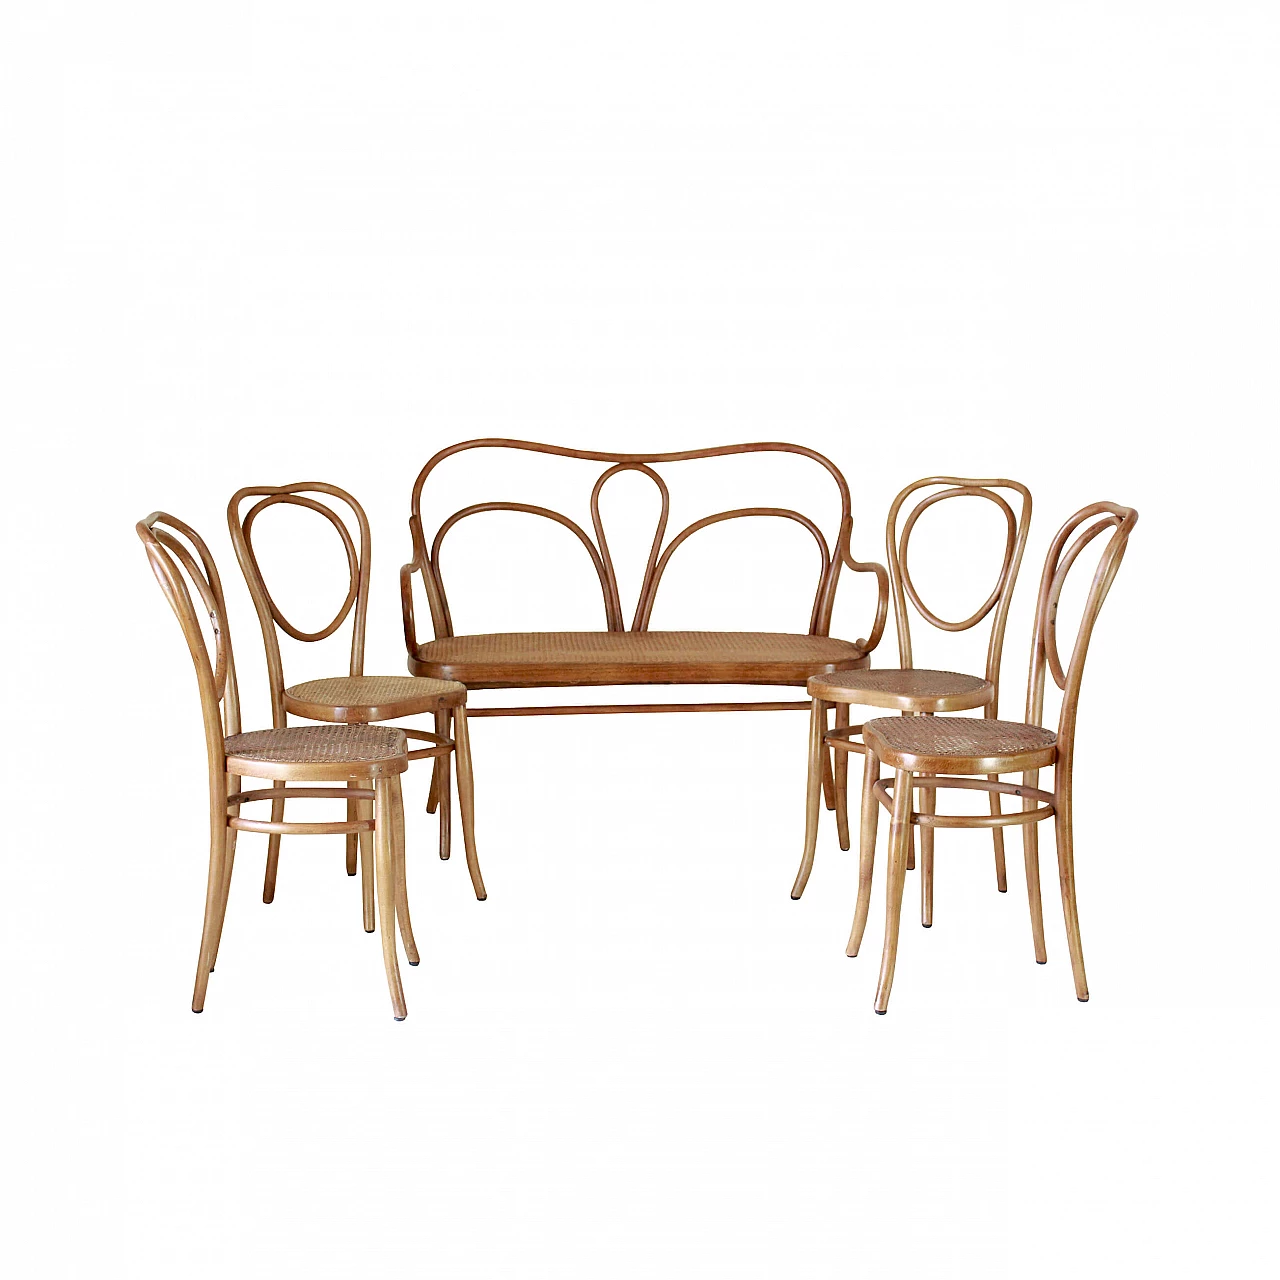 Set of 4 chairs and sofa in Thonet style, 19th century 1182929